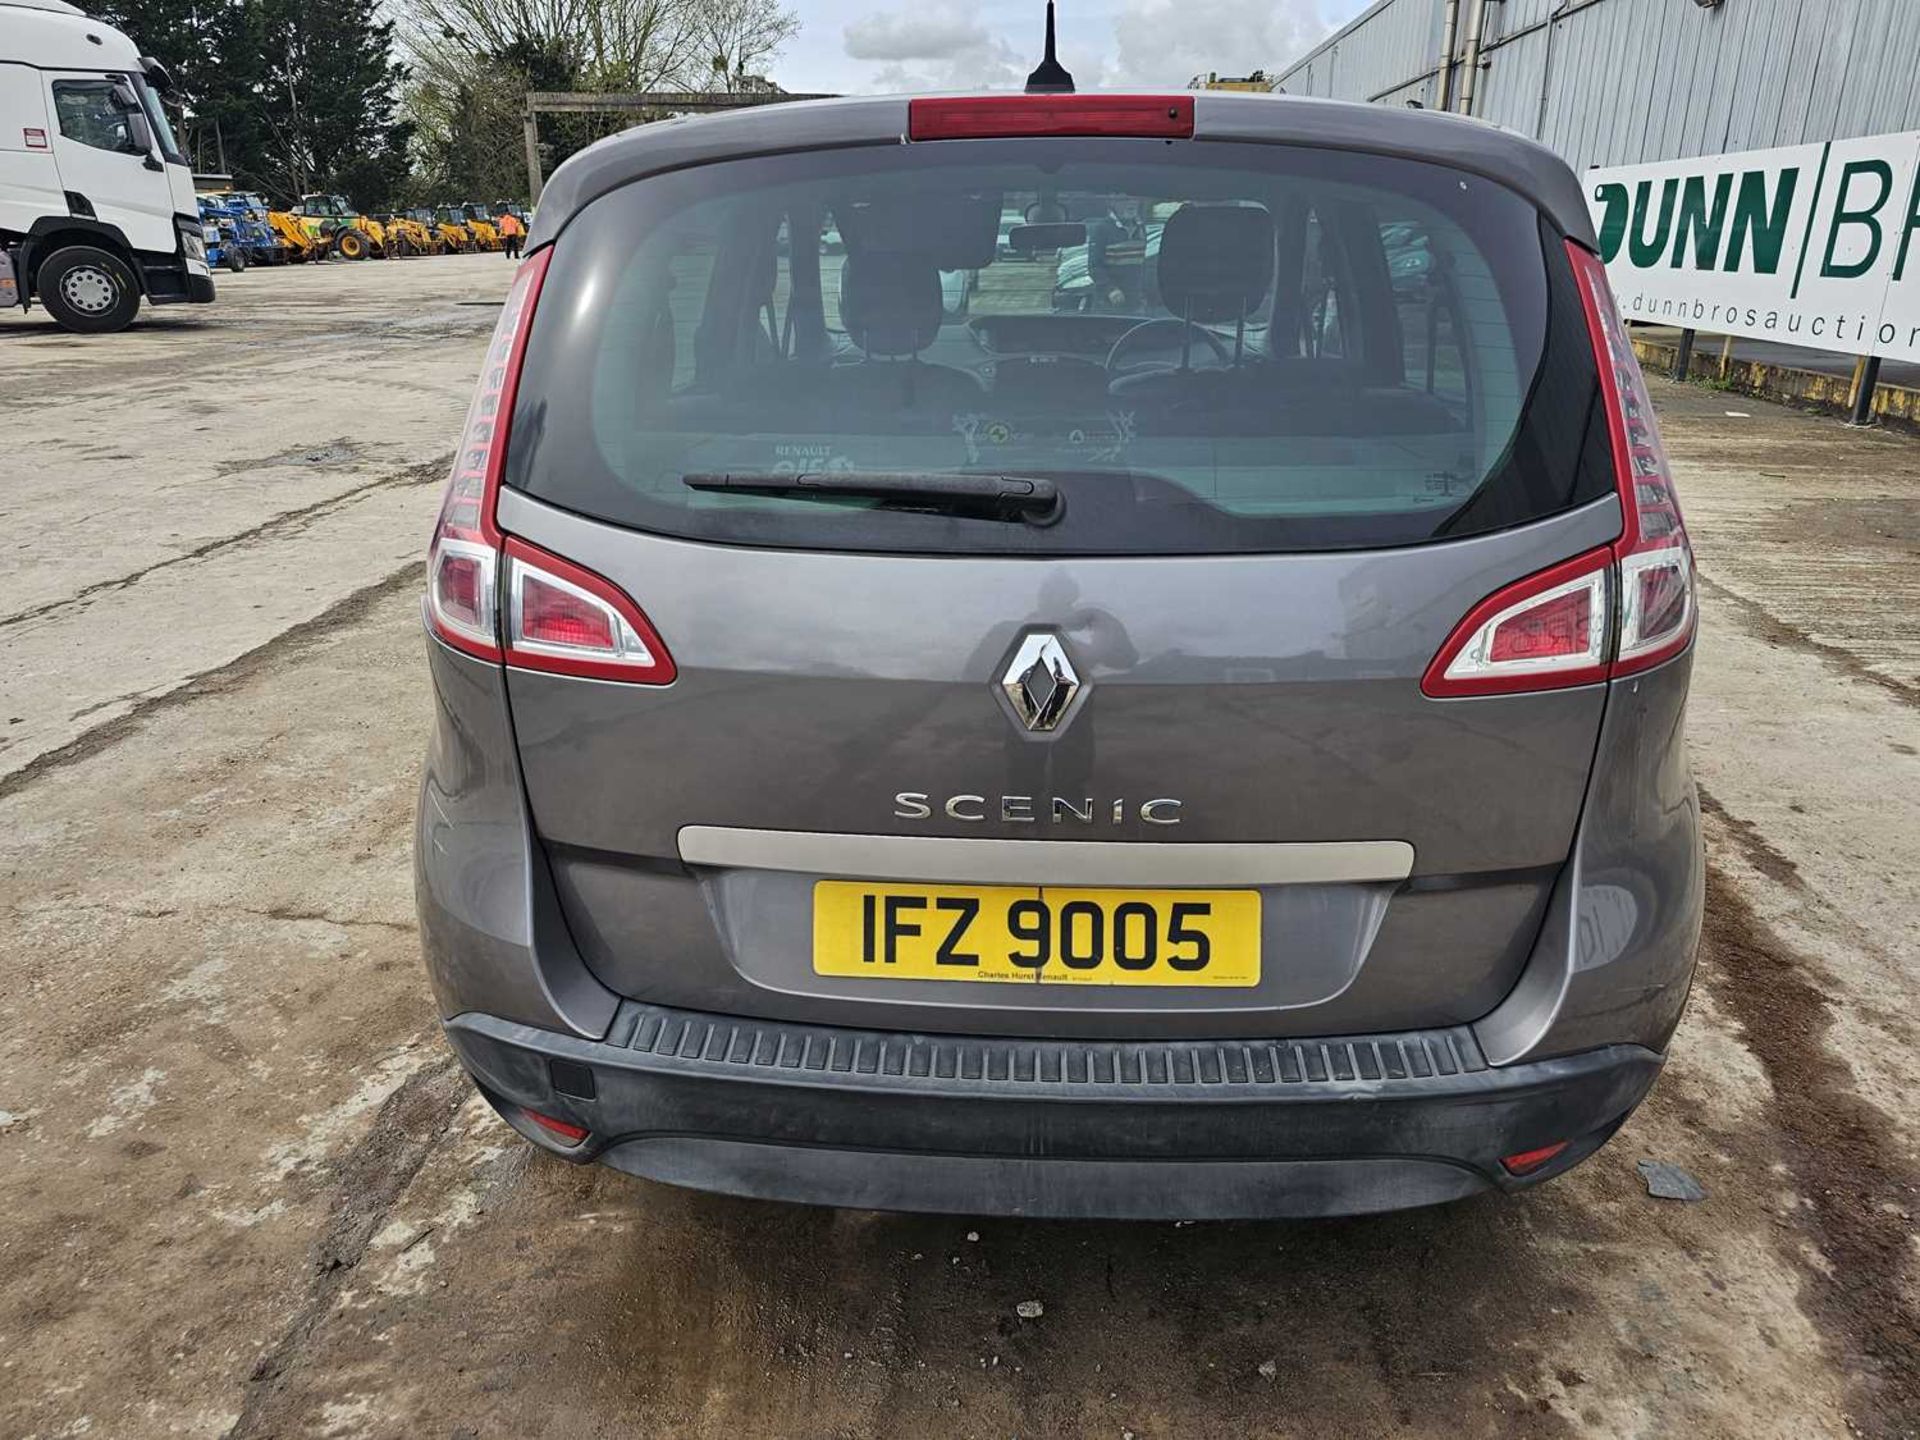 2011 Renault Scenic Dynamique Ttom, 6 Speed, Sat Nav, Bluetooth, Cruise Control, A/C (Reg. Docs. & S - Image 6 of 26